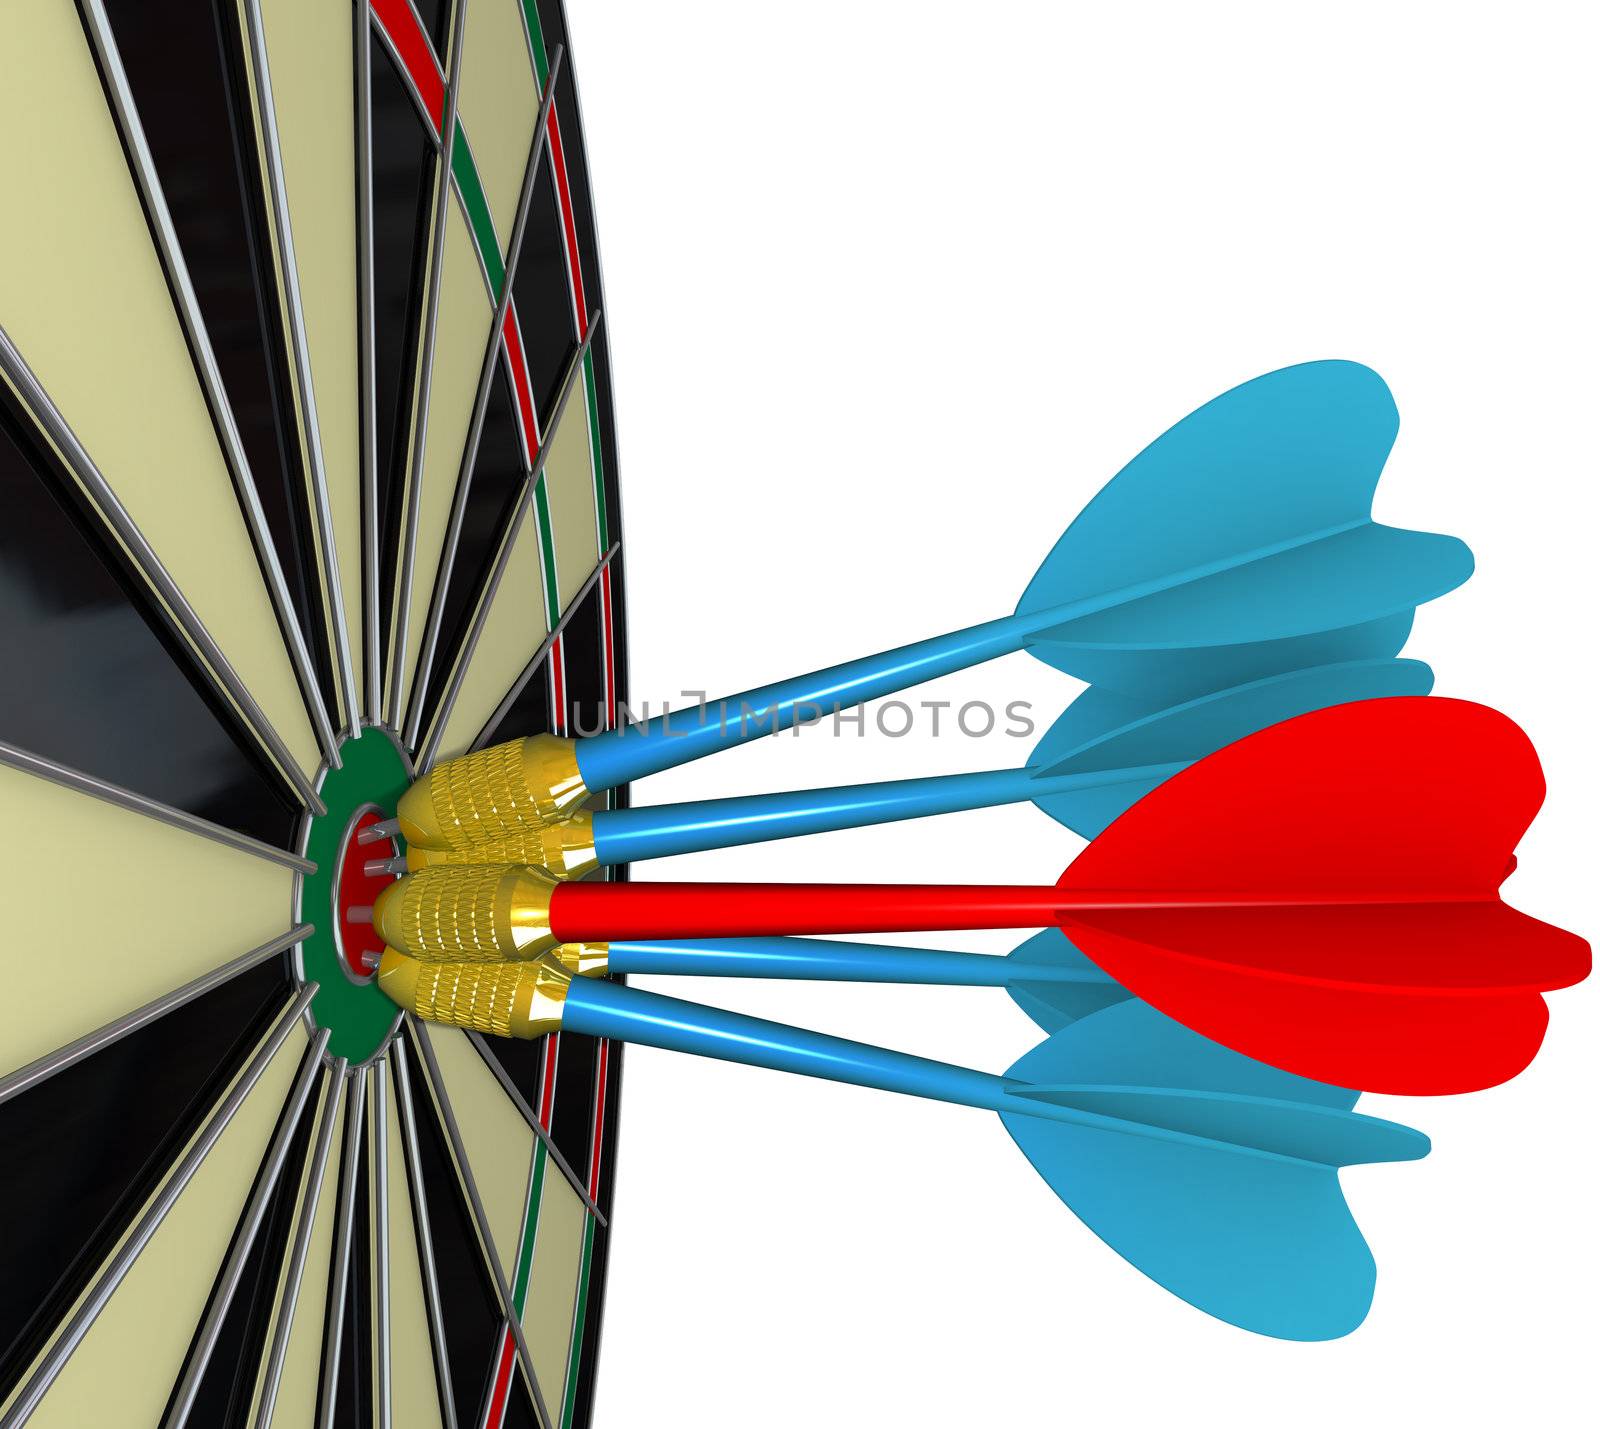 Several darts, four blue and one red, hit the center bulls-eye target on a dart board, illustrating heated competition between adversaries in sports or business